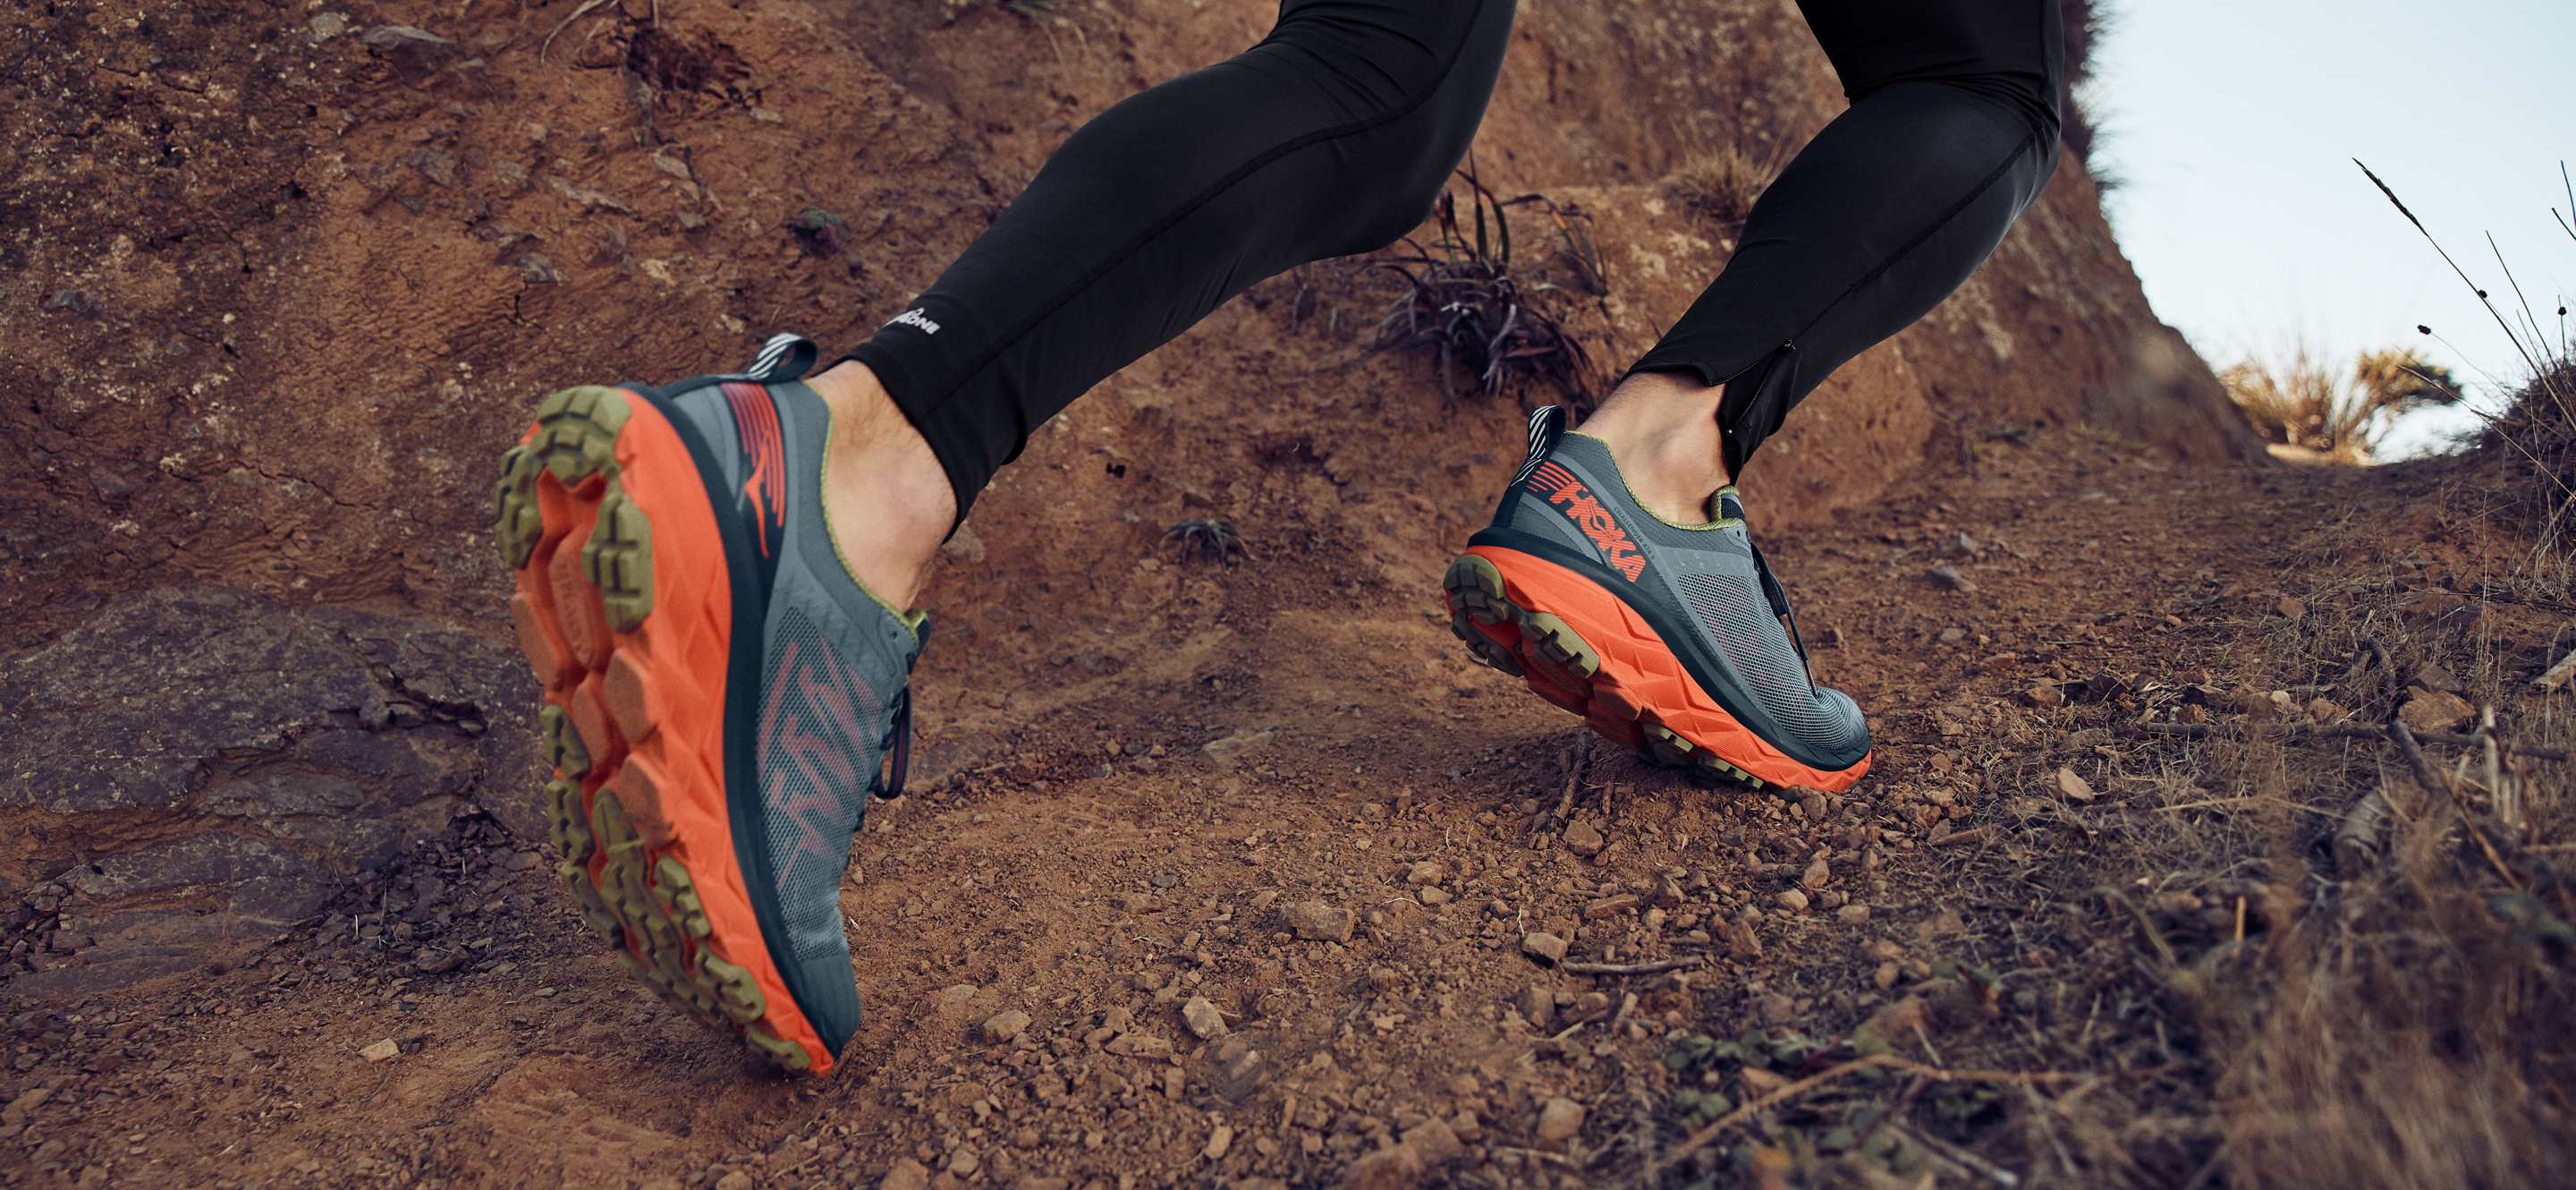 Runners wearing Hoka One One running shoes on a dirt trail.